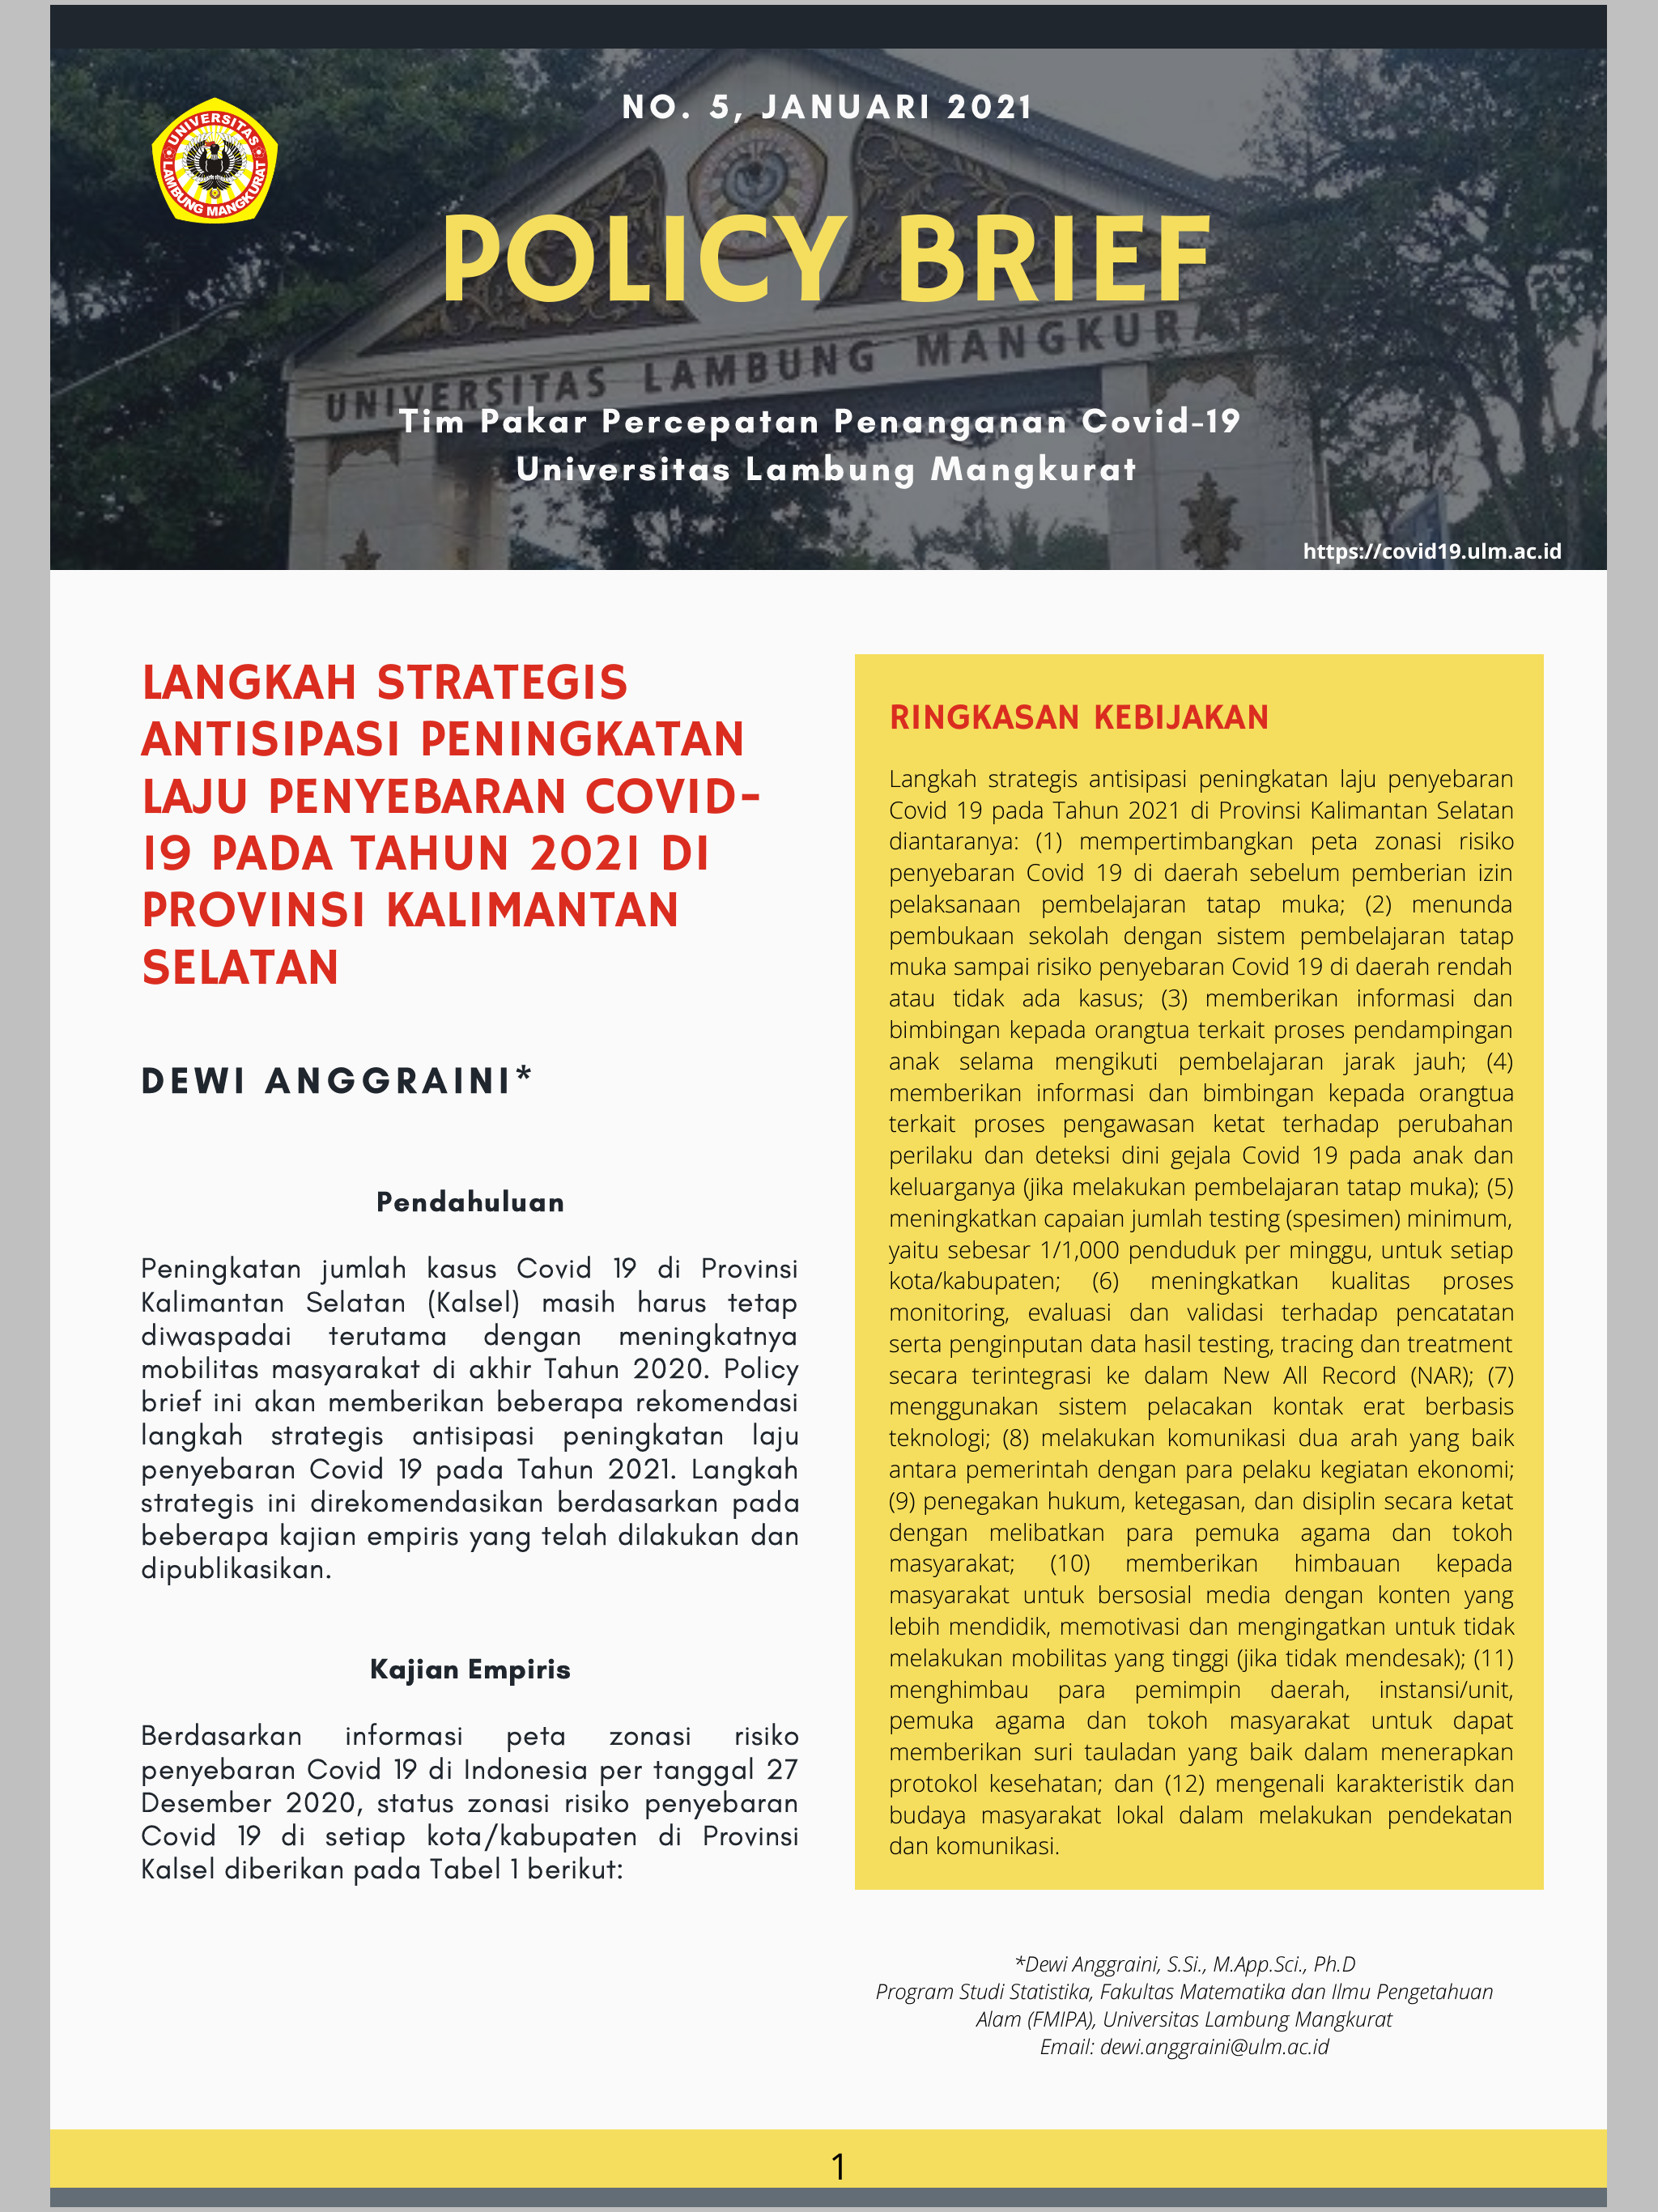 Detail Contoh Policy Brief Nomer 5